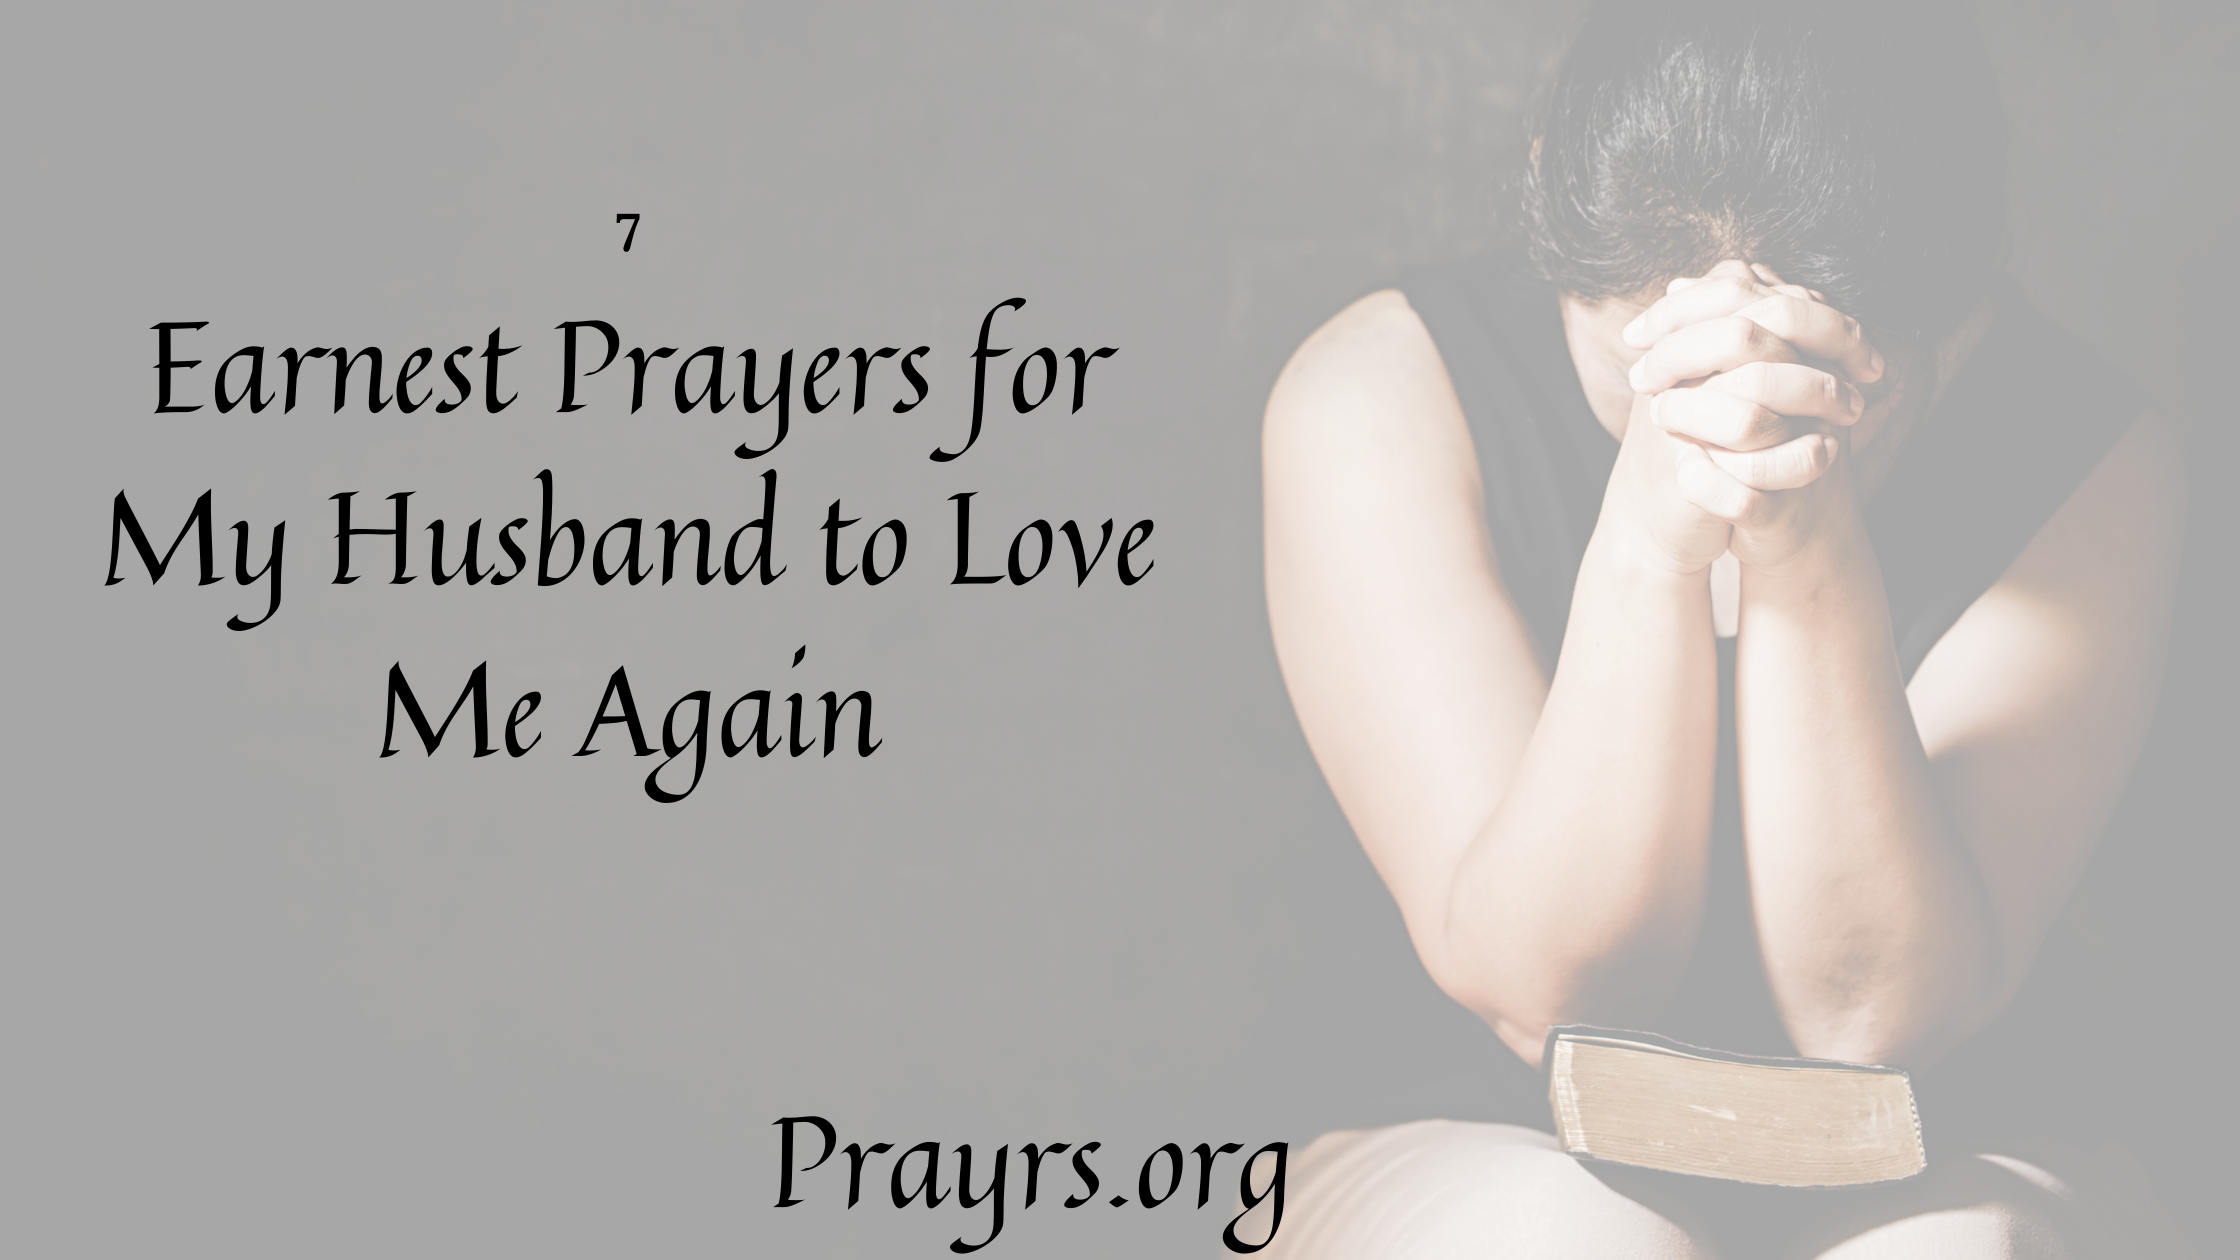 7 Earnest Prayers for My Husband to Love Me Again